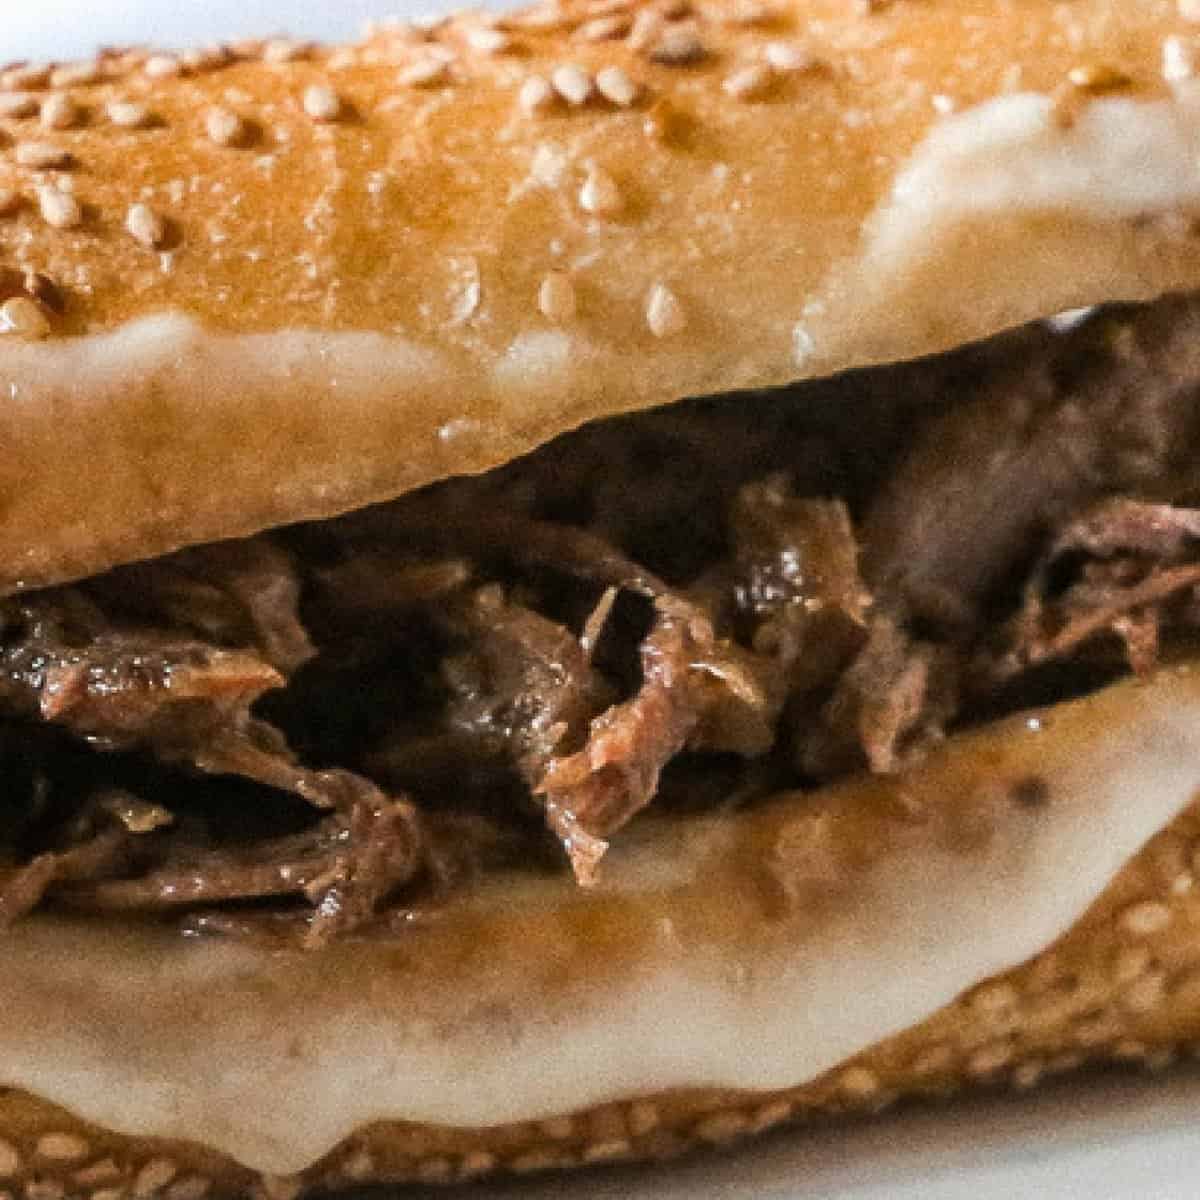 Warm french dip sandwich with melted provolone cheese and a tasty au jus dip